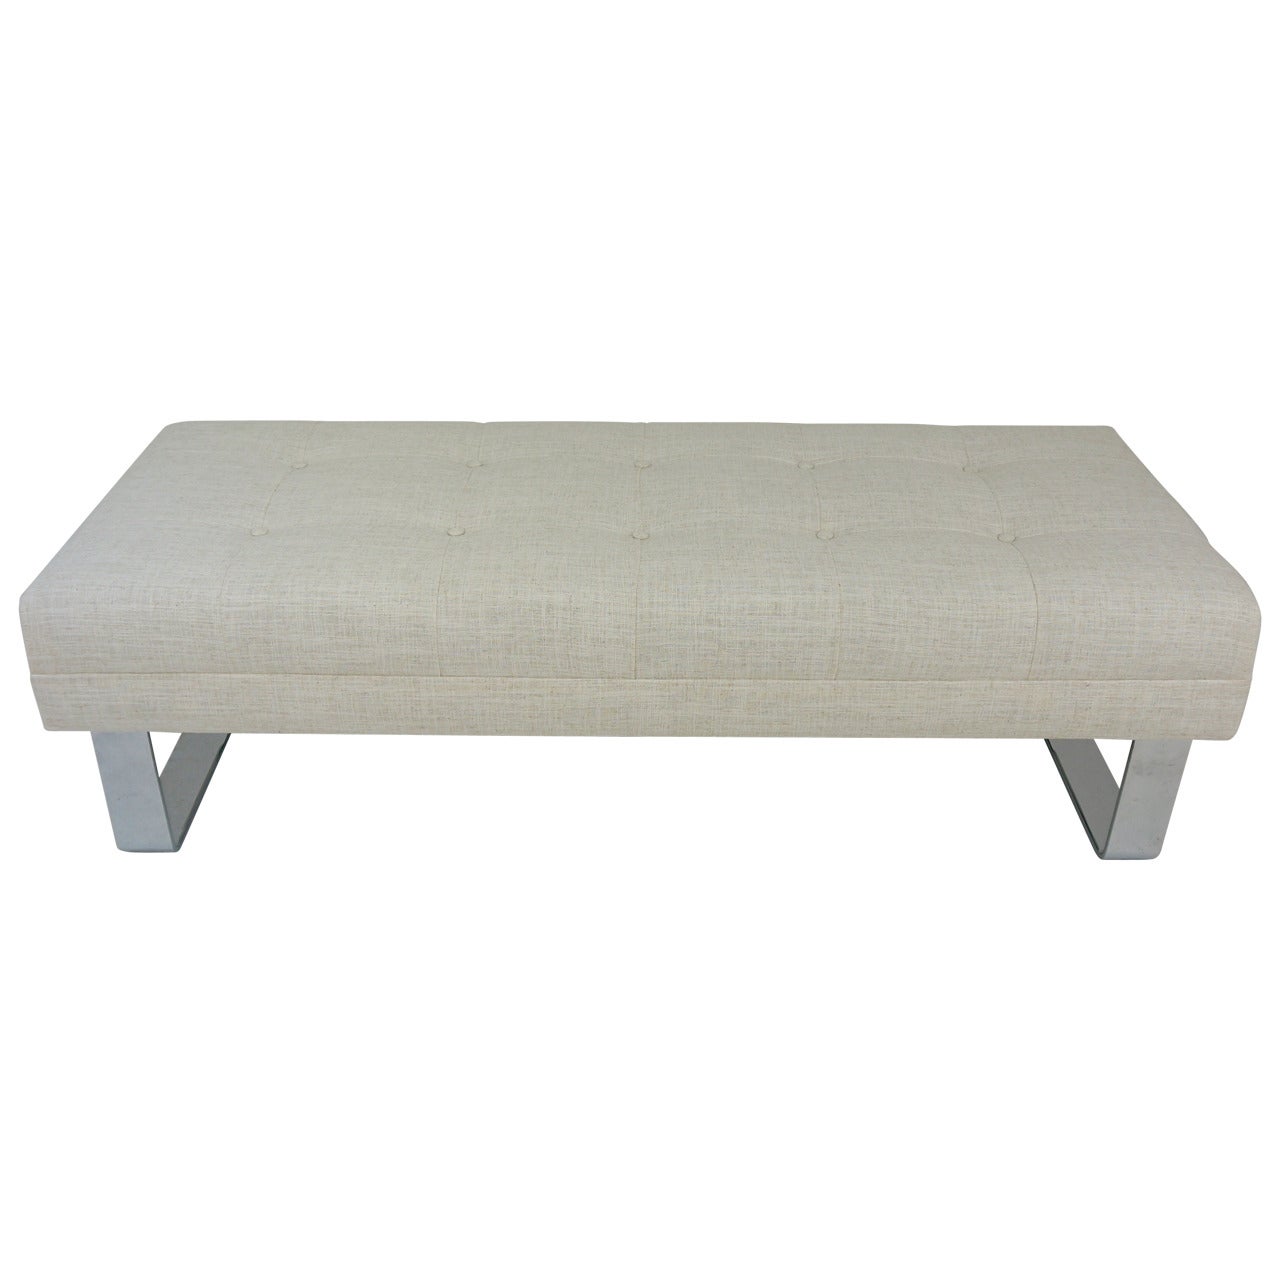 Mid-Century Upholstered Bench with Polished Chrome by Milo Baughman, 1970s